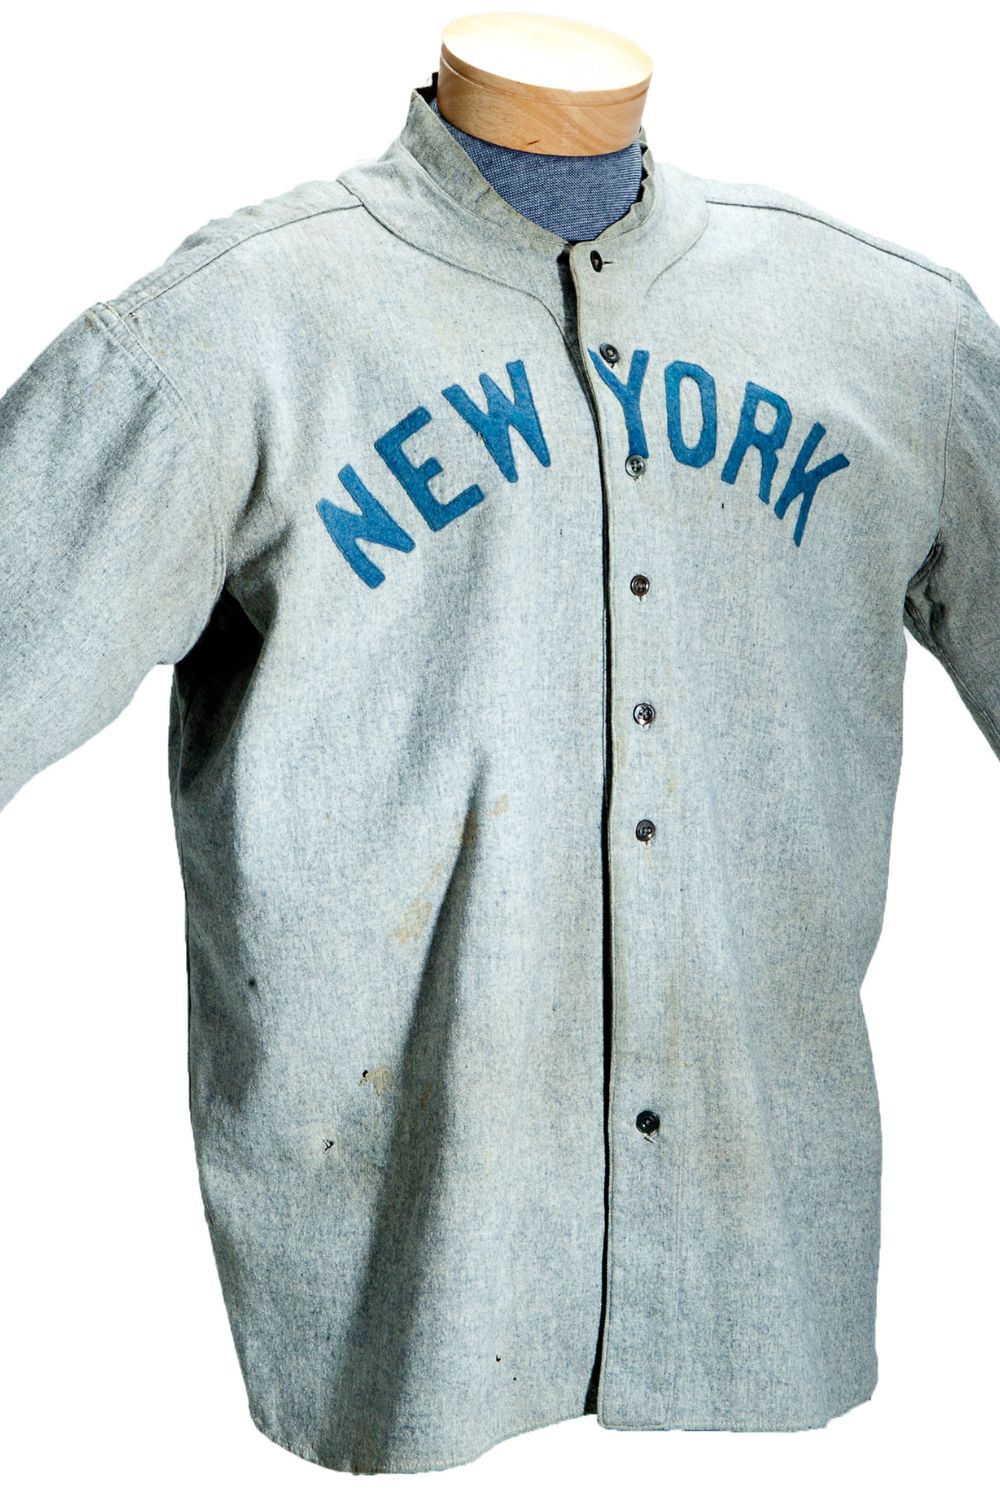 Babe Ruth 1920 Jersey (Source: The New York Times)